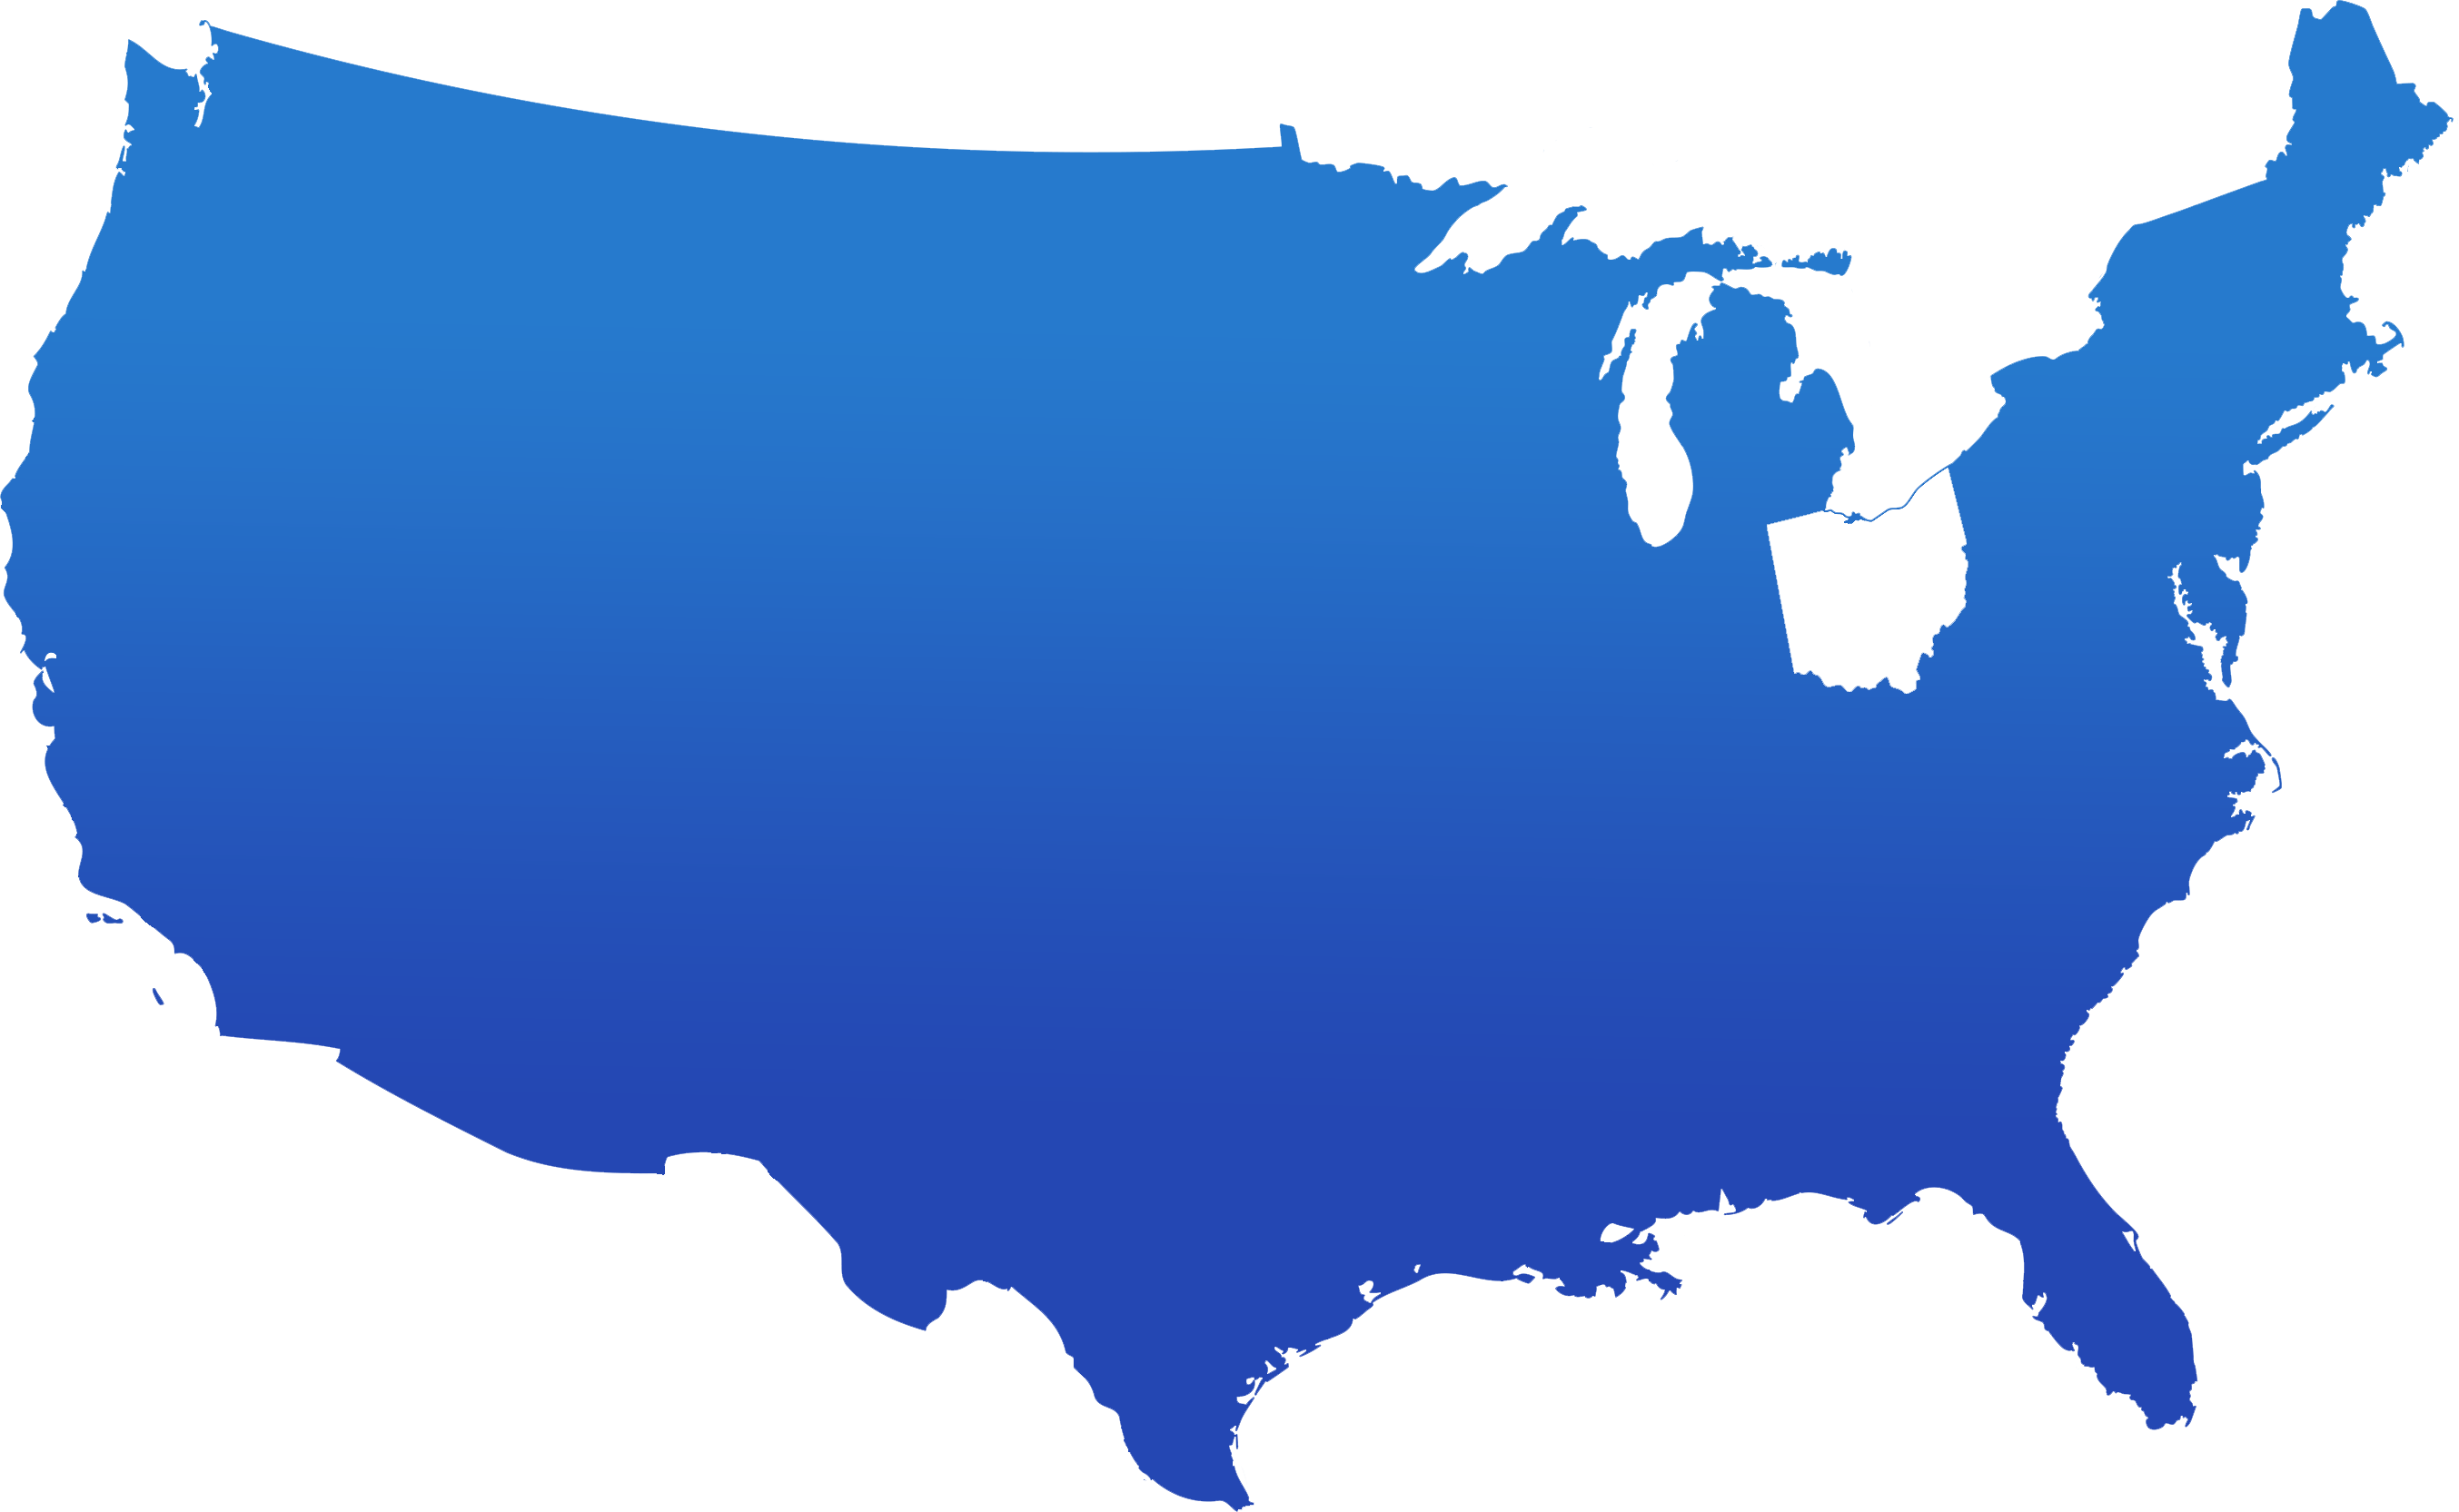 Blue map of the Untied States